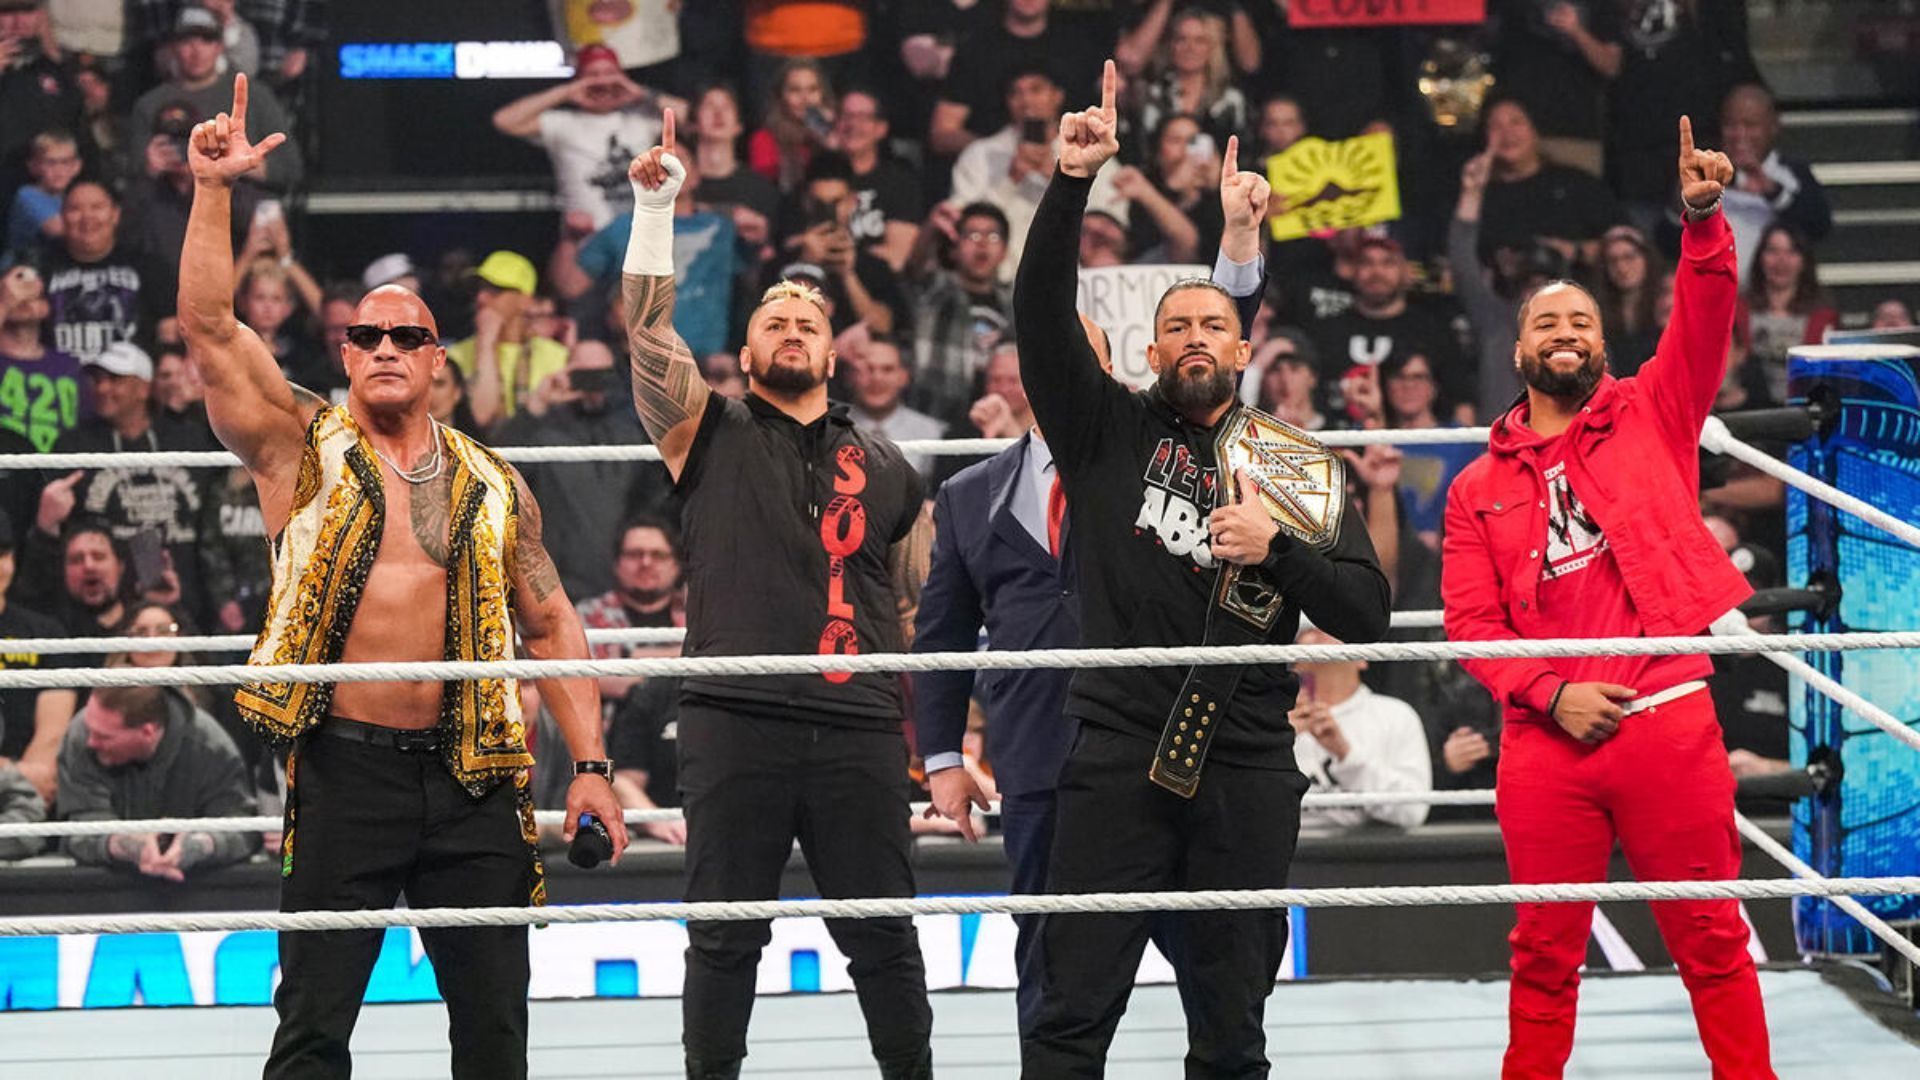 The Bloodline officially added The Rock to their ranks